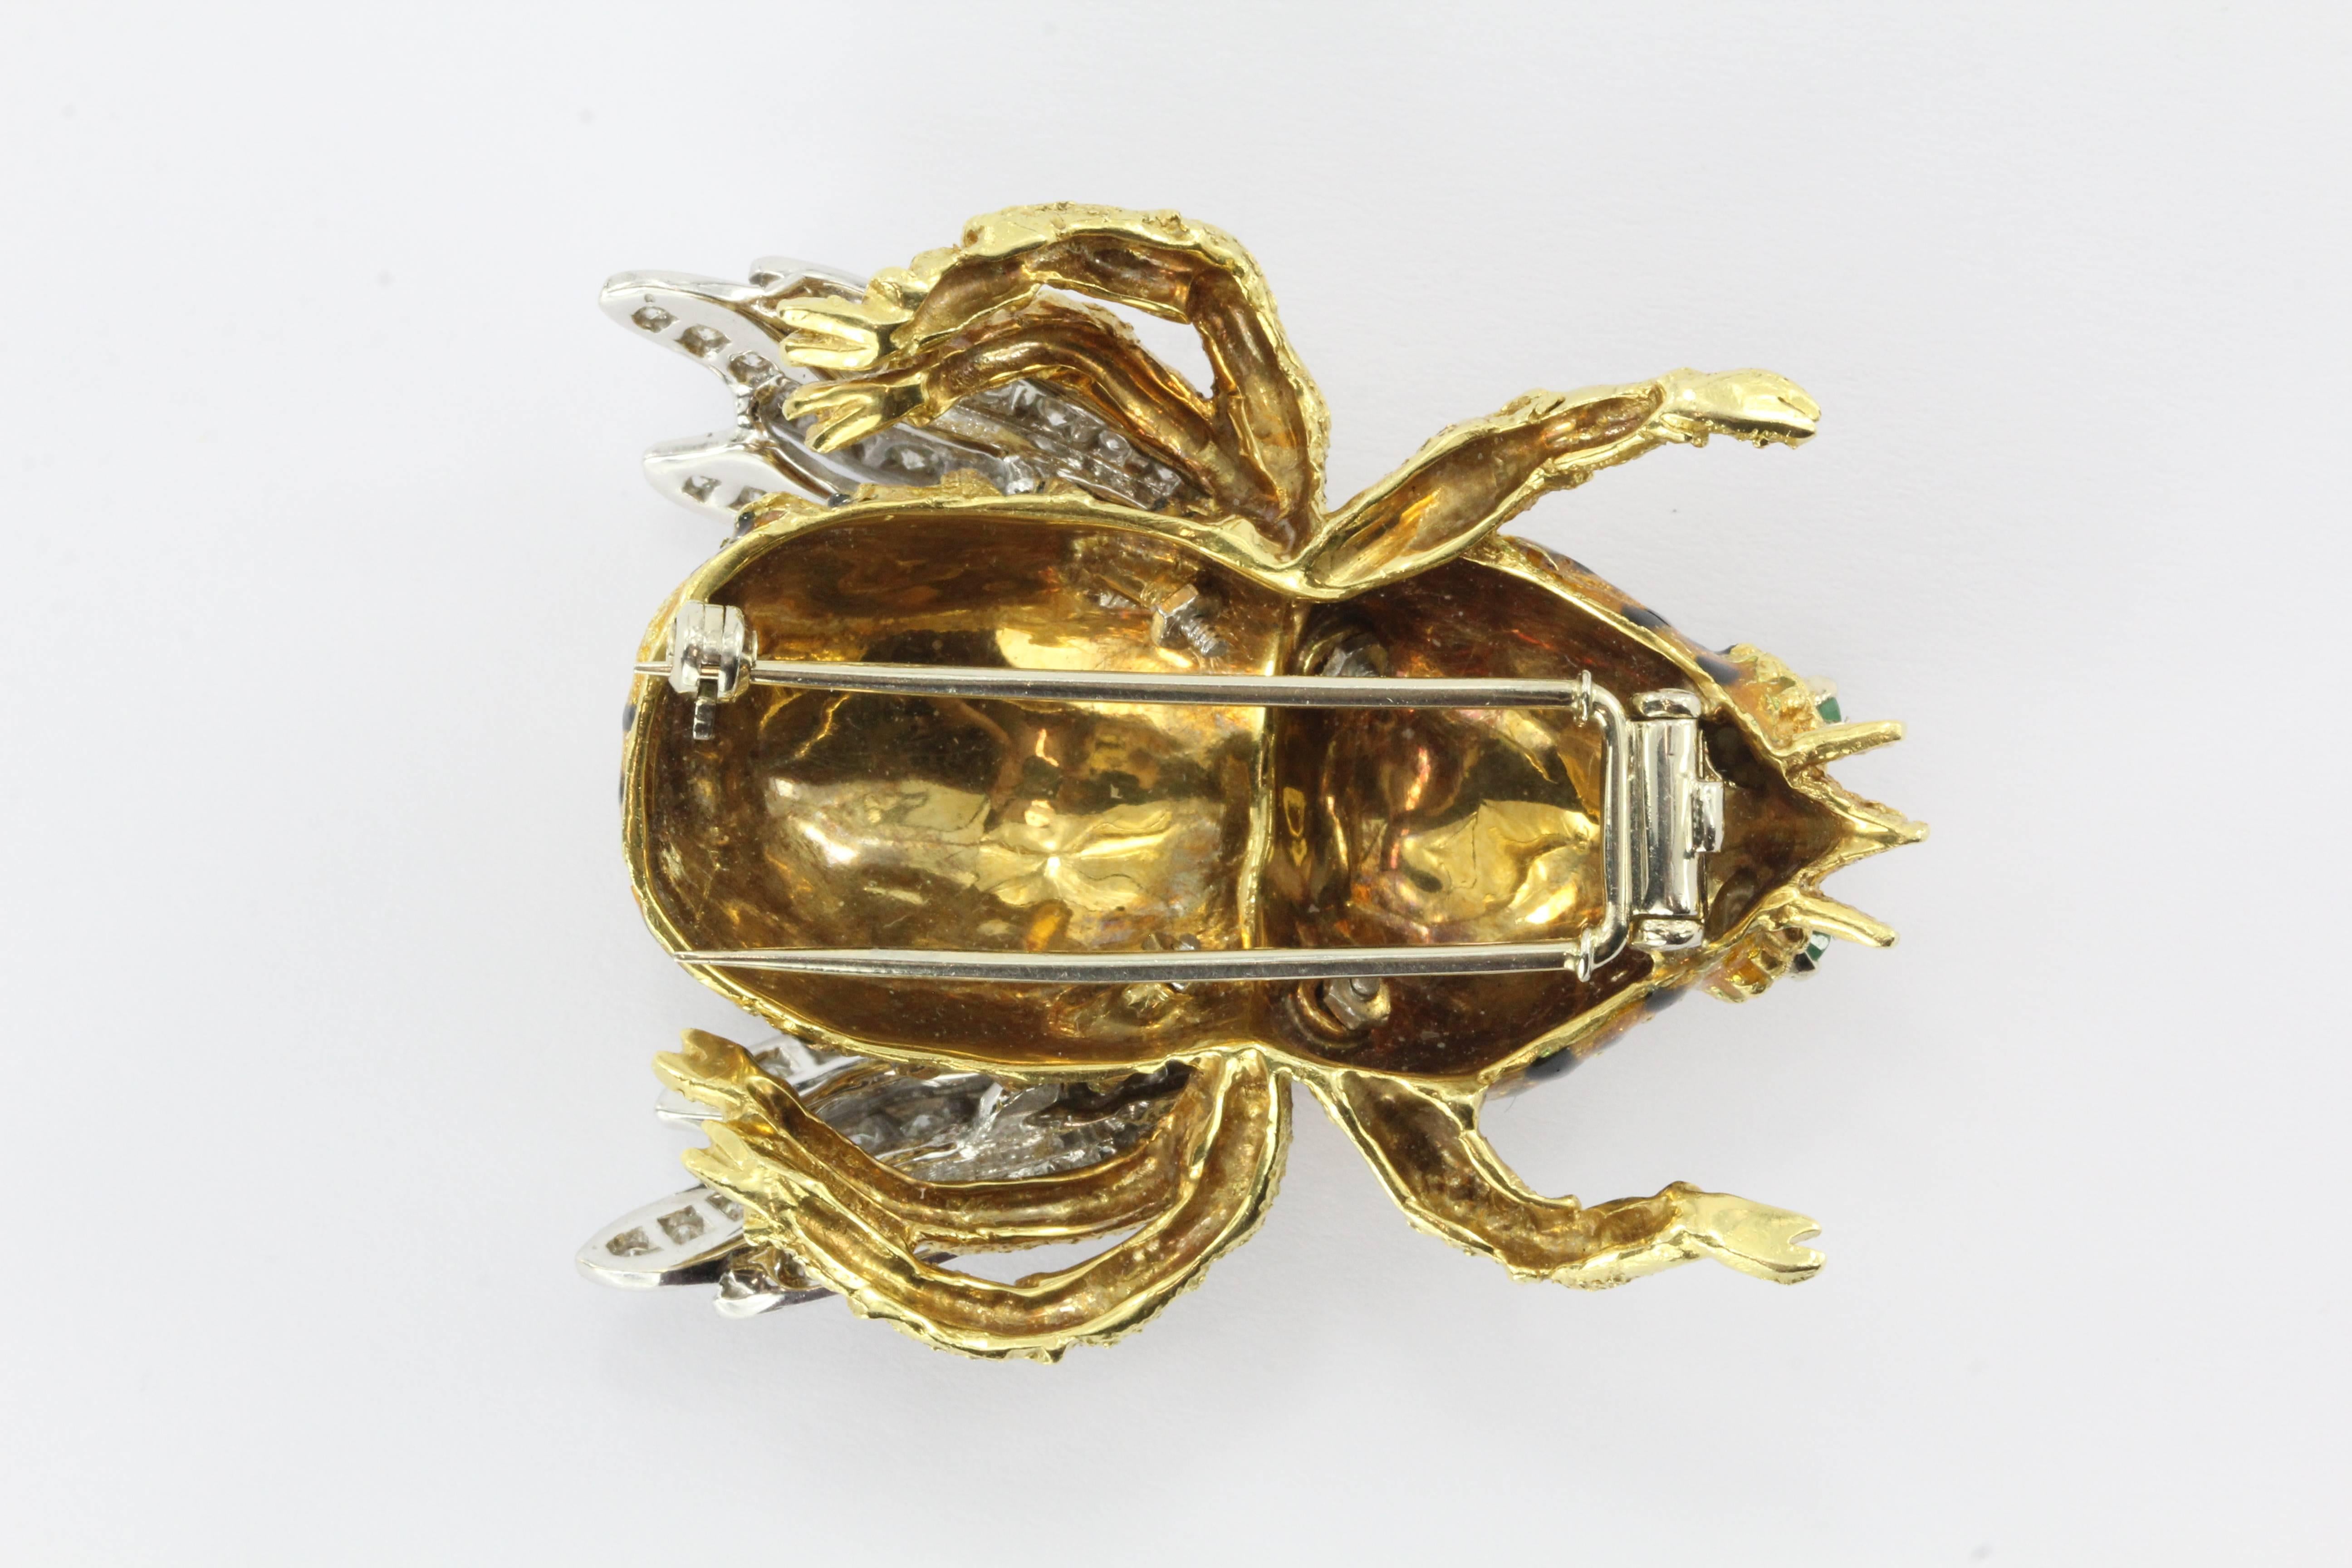 This exquisite bee is sweeter than honey and eager to take up residence on your favorite jacket or coat. 

The honeybee is handcrafted entirely of 18k yellow and white (wings) gold and is stamped with a 750 mark.

Its two emerald eyes add even